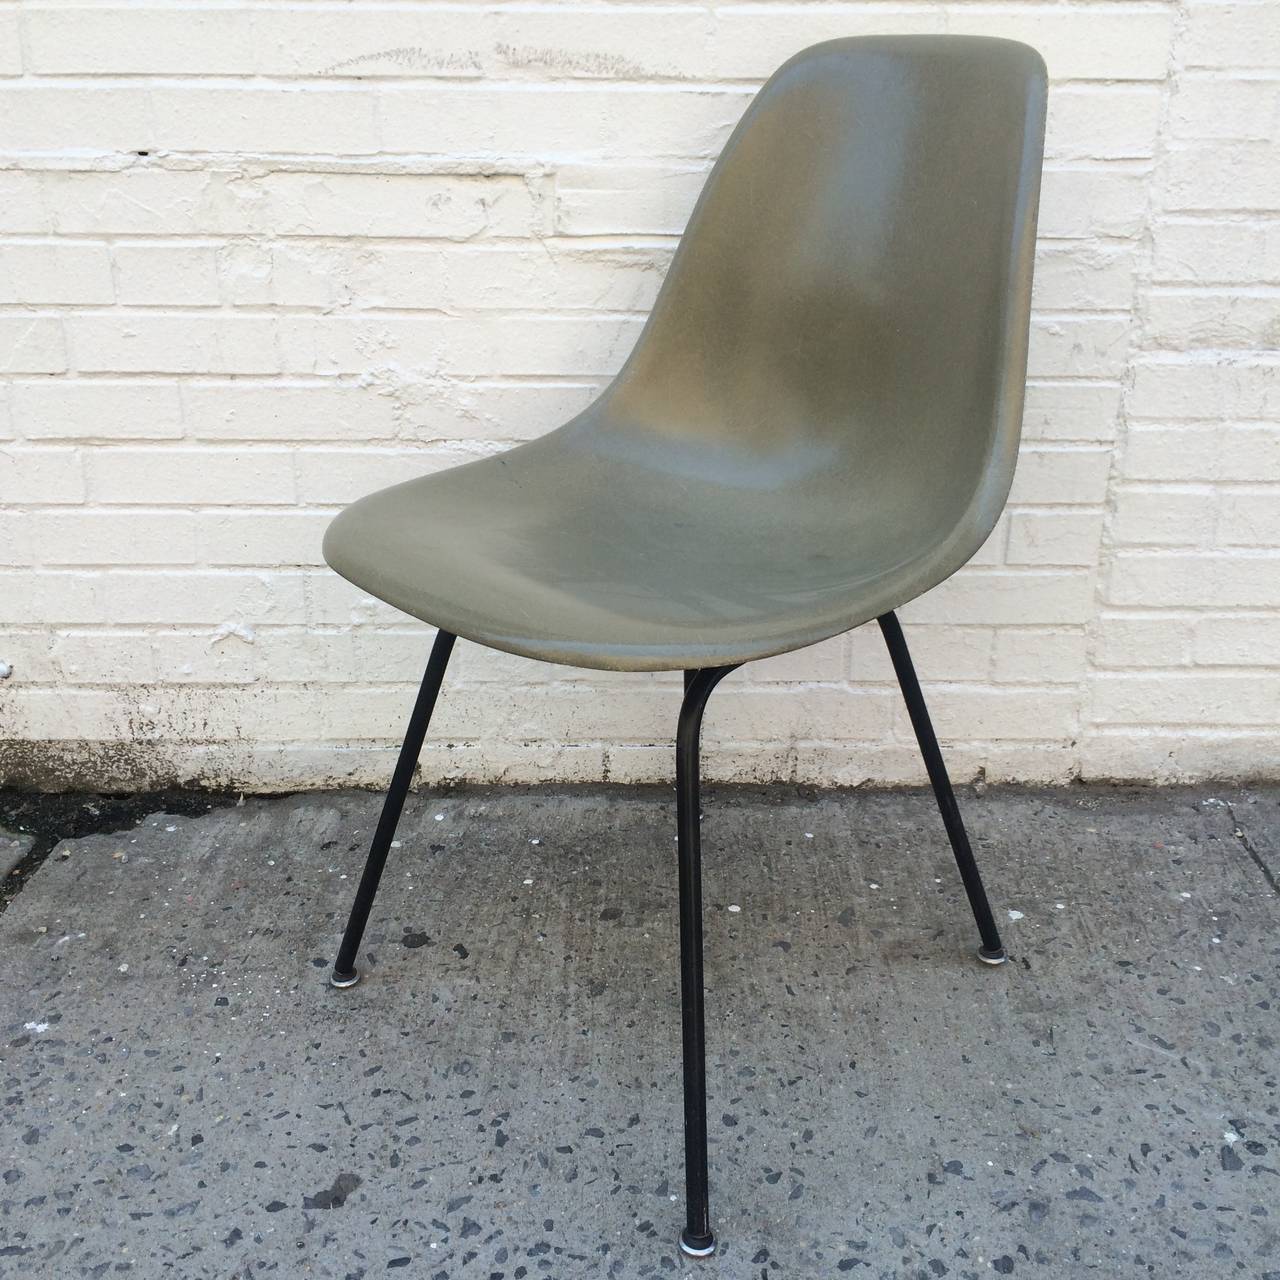 Rare color Raw Umber Herman Miller Eames fiberglass side chair. DSX model. Black base. Shell is in very good vintage condition. Normal edge wear from use but no cracks, gouges, dings, dents, holes. Color is rich, even, without fading.